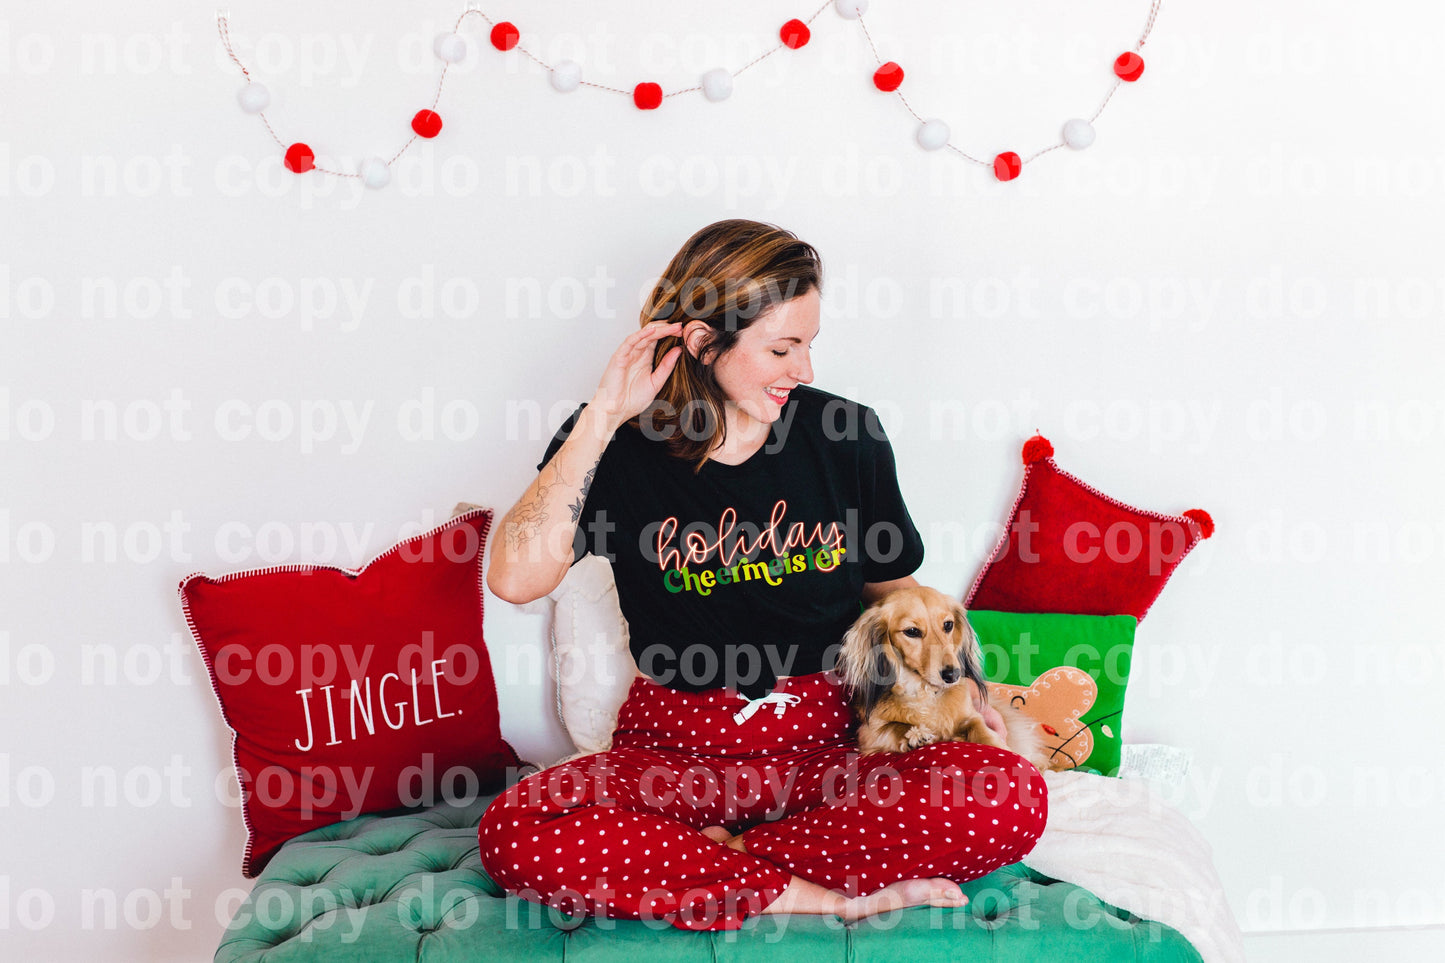 Holiday Cheermeister Dream Print or Sublimation Print